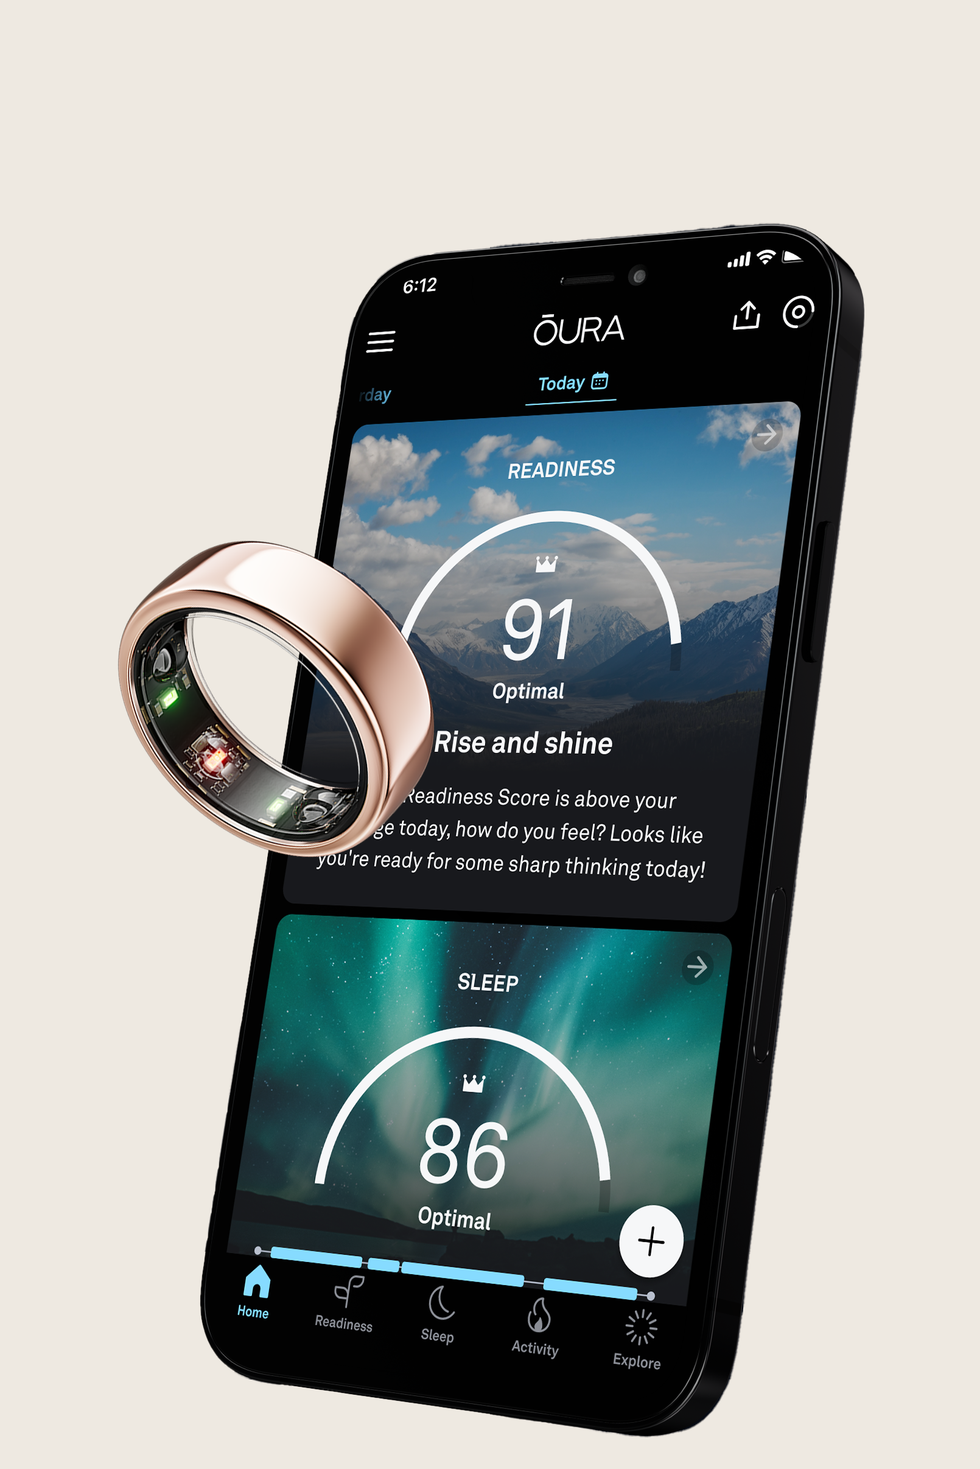 Is the Oura ring really worth it? We test out the fitness tracker